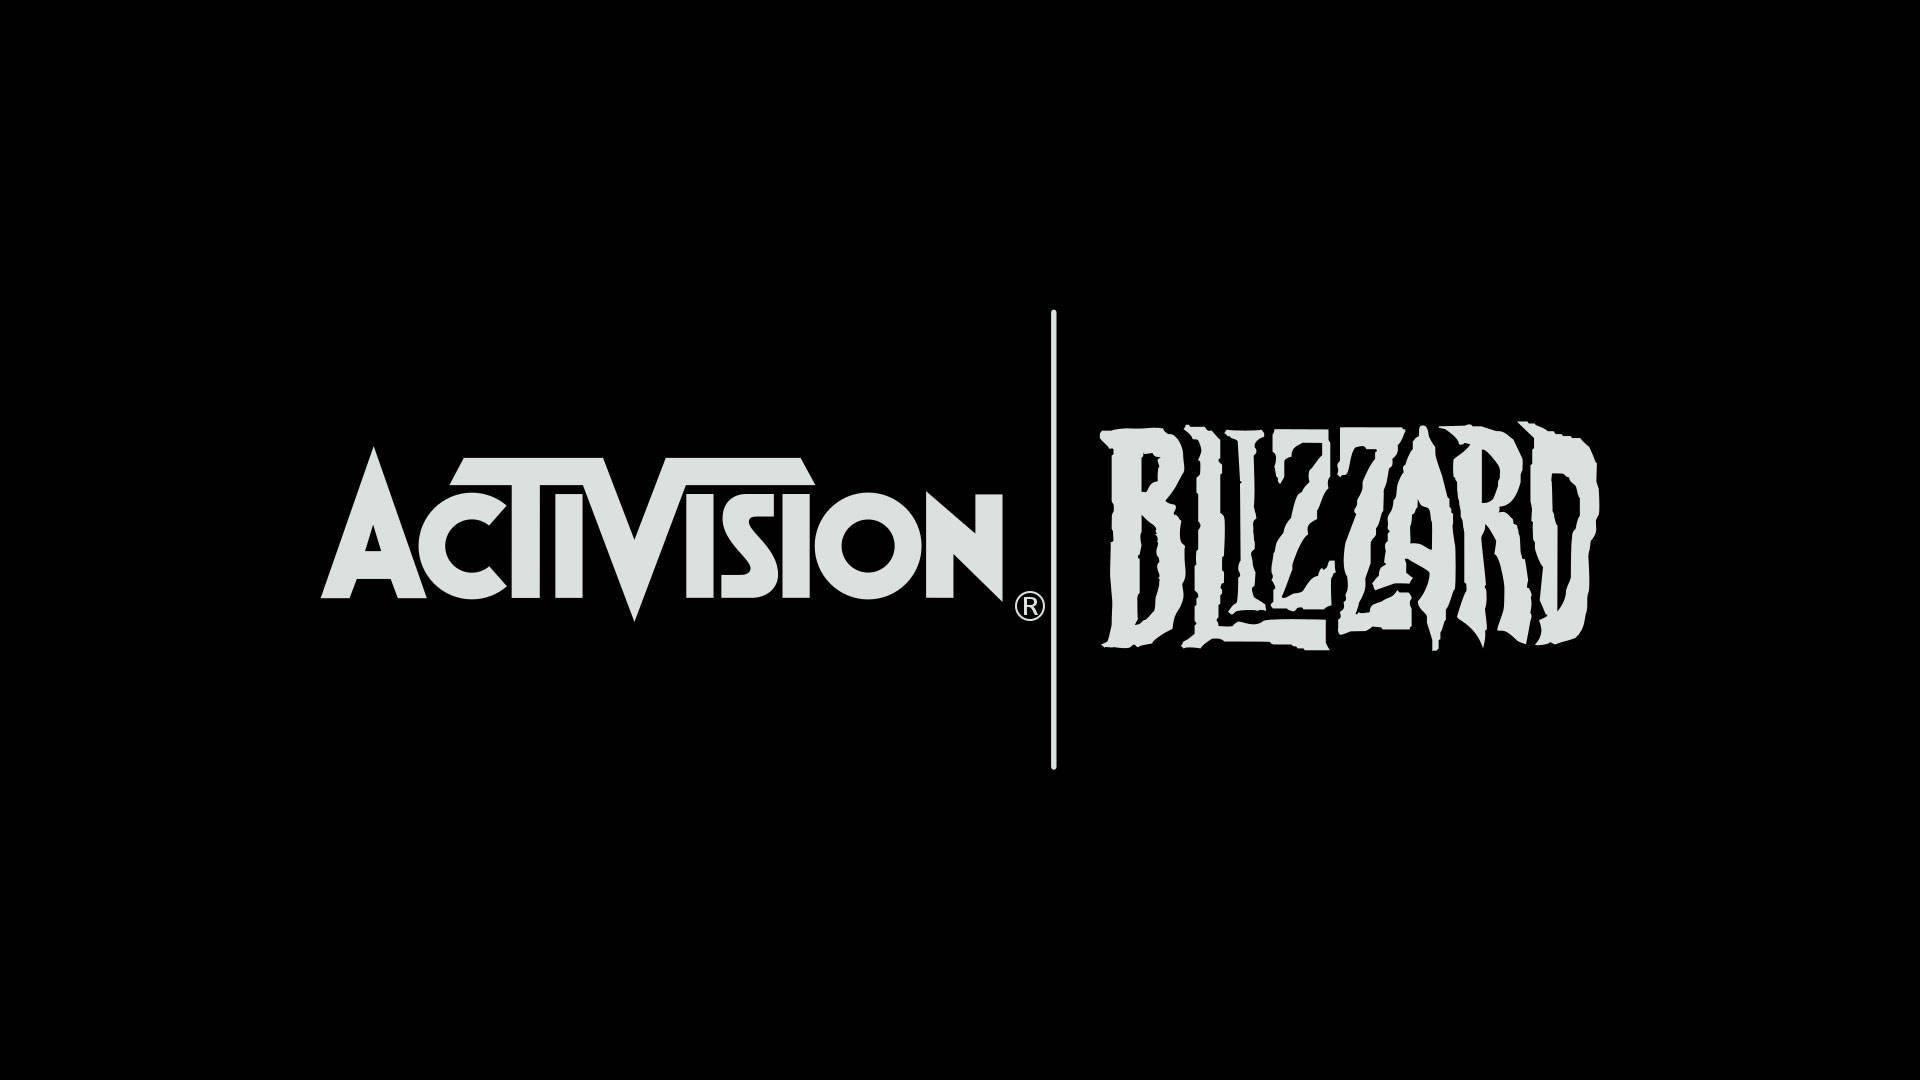 Microsoft Says Activision Has No “Must Have” Games That Will Affect The Industry